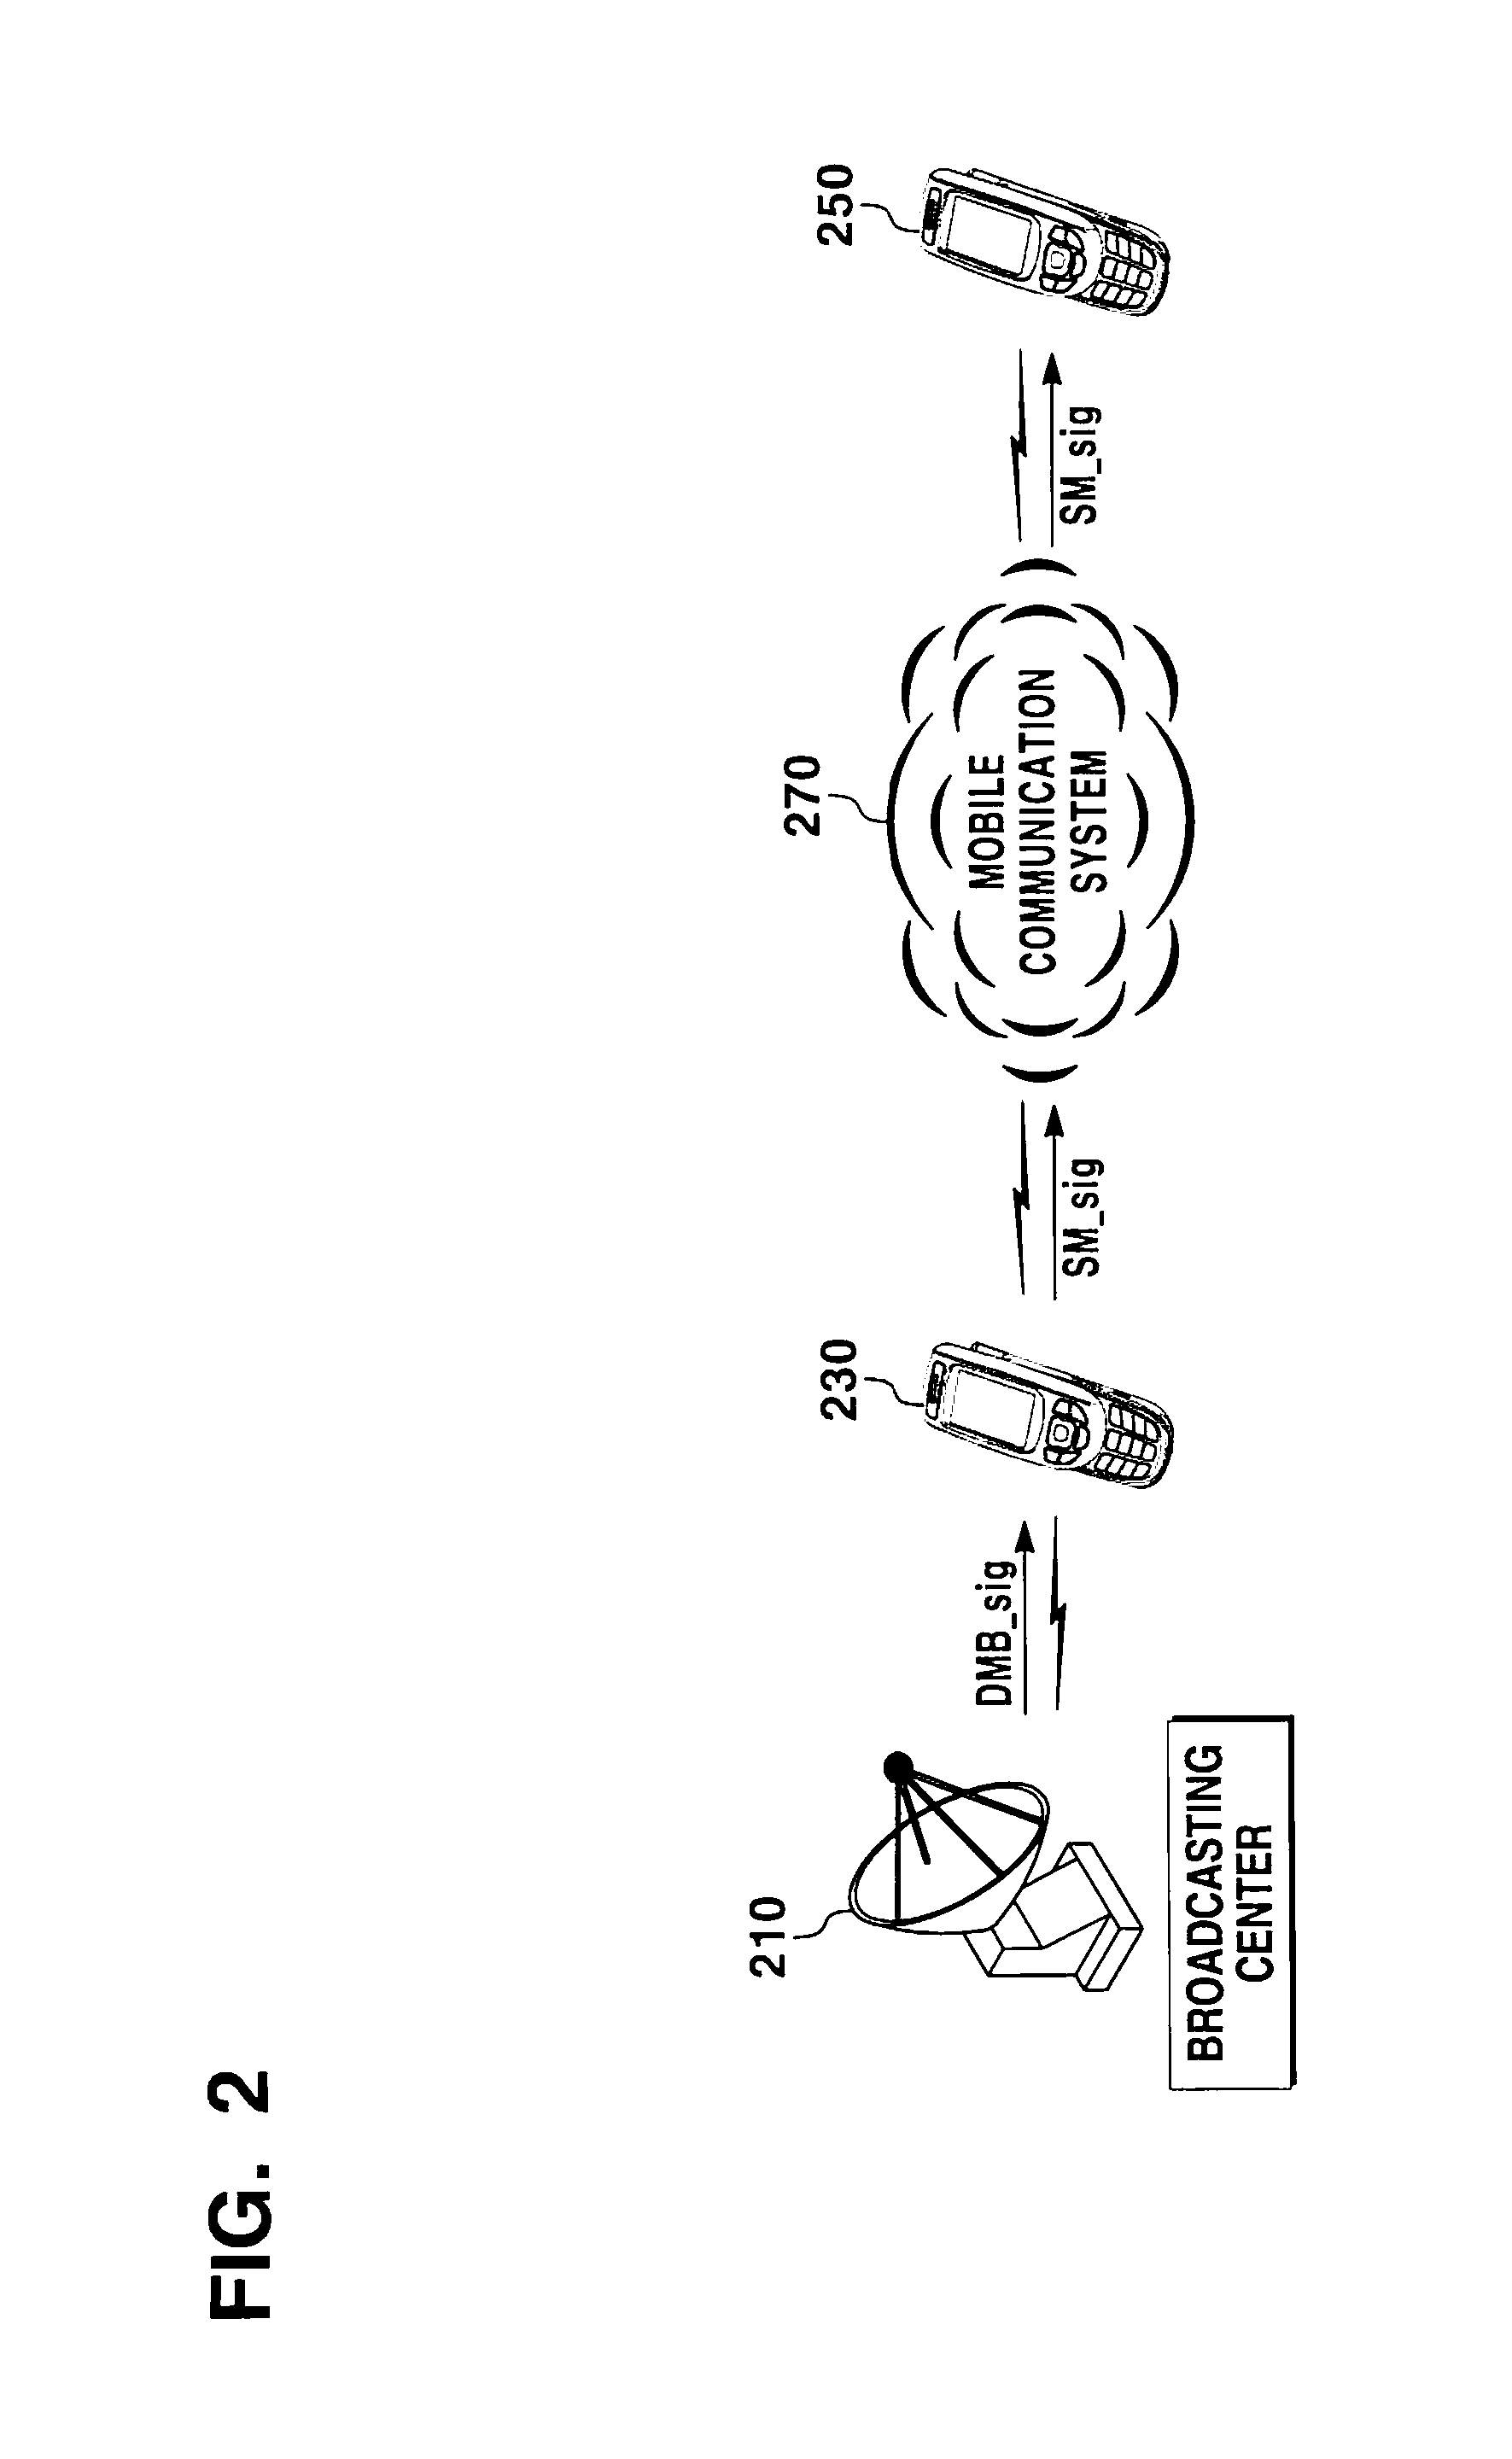 Dmb data-based short messaging system and method for a digital broadcast-enabled mobile phone